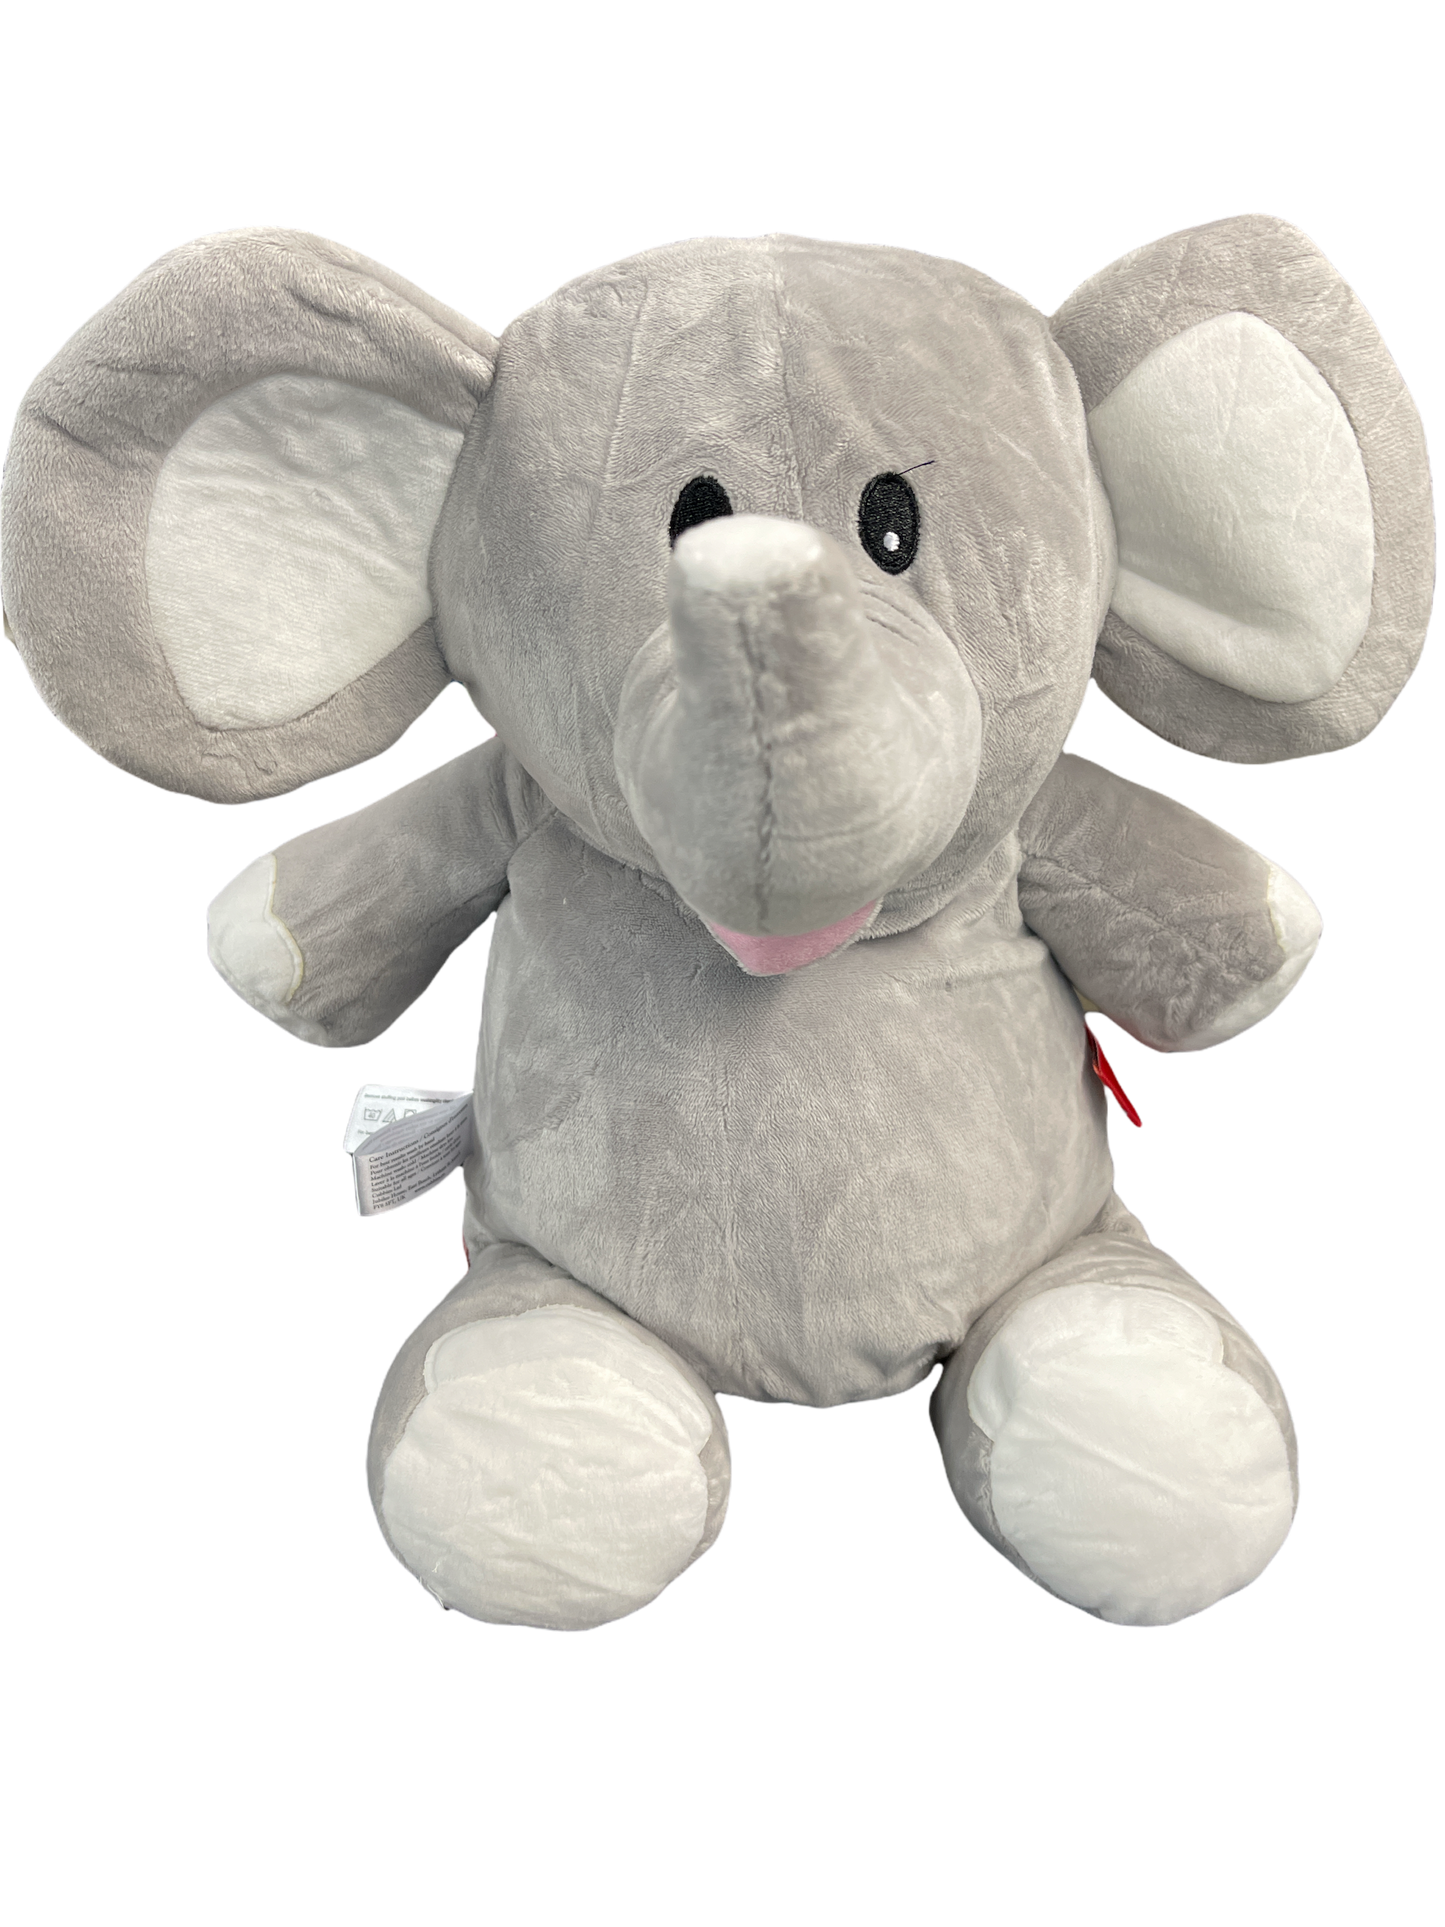 Embroidered Stuffed Girl Elephant Animal Cubbie Personalized Baby Gift